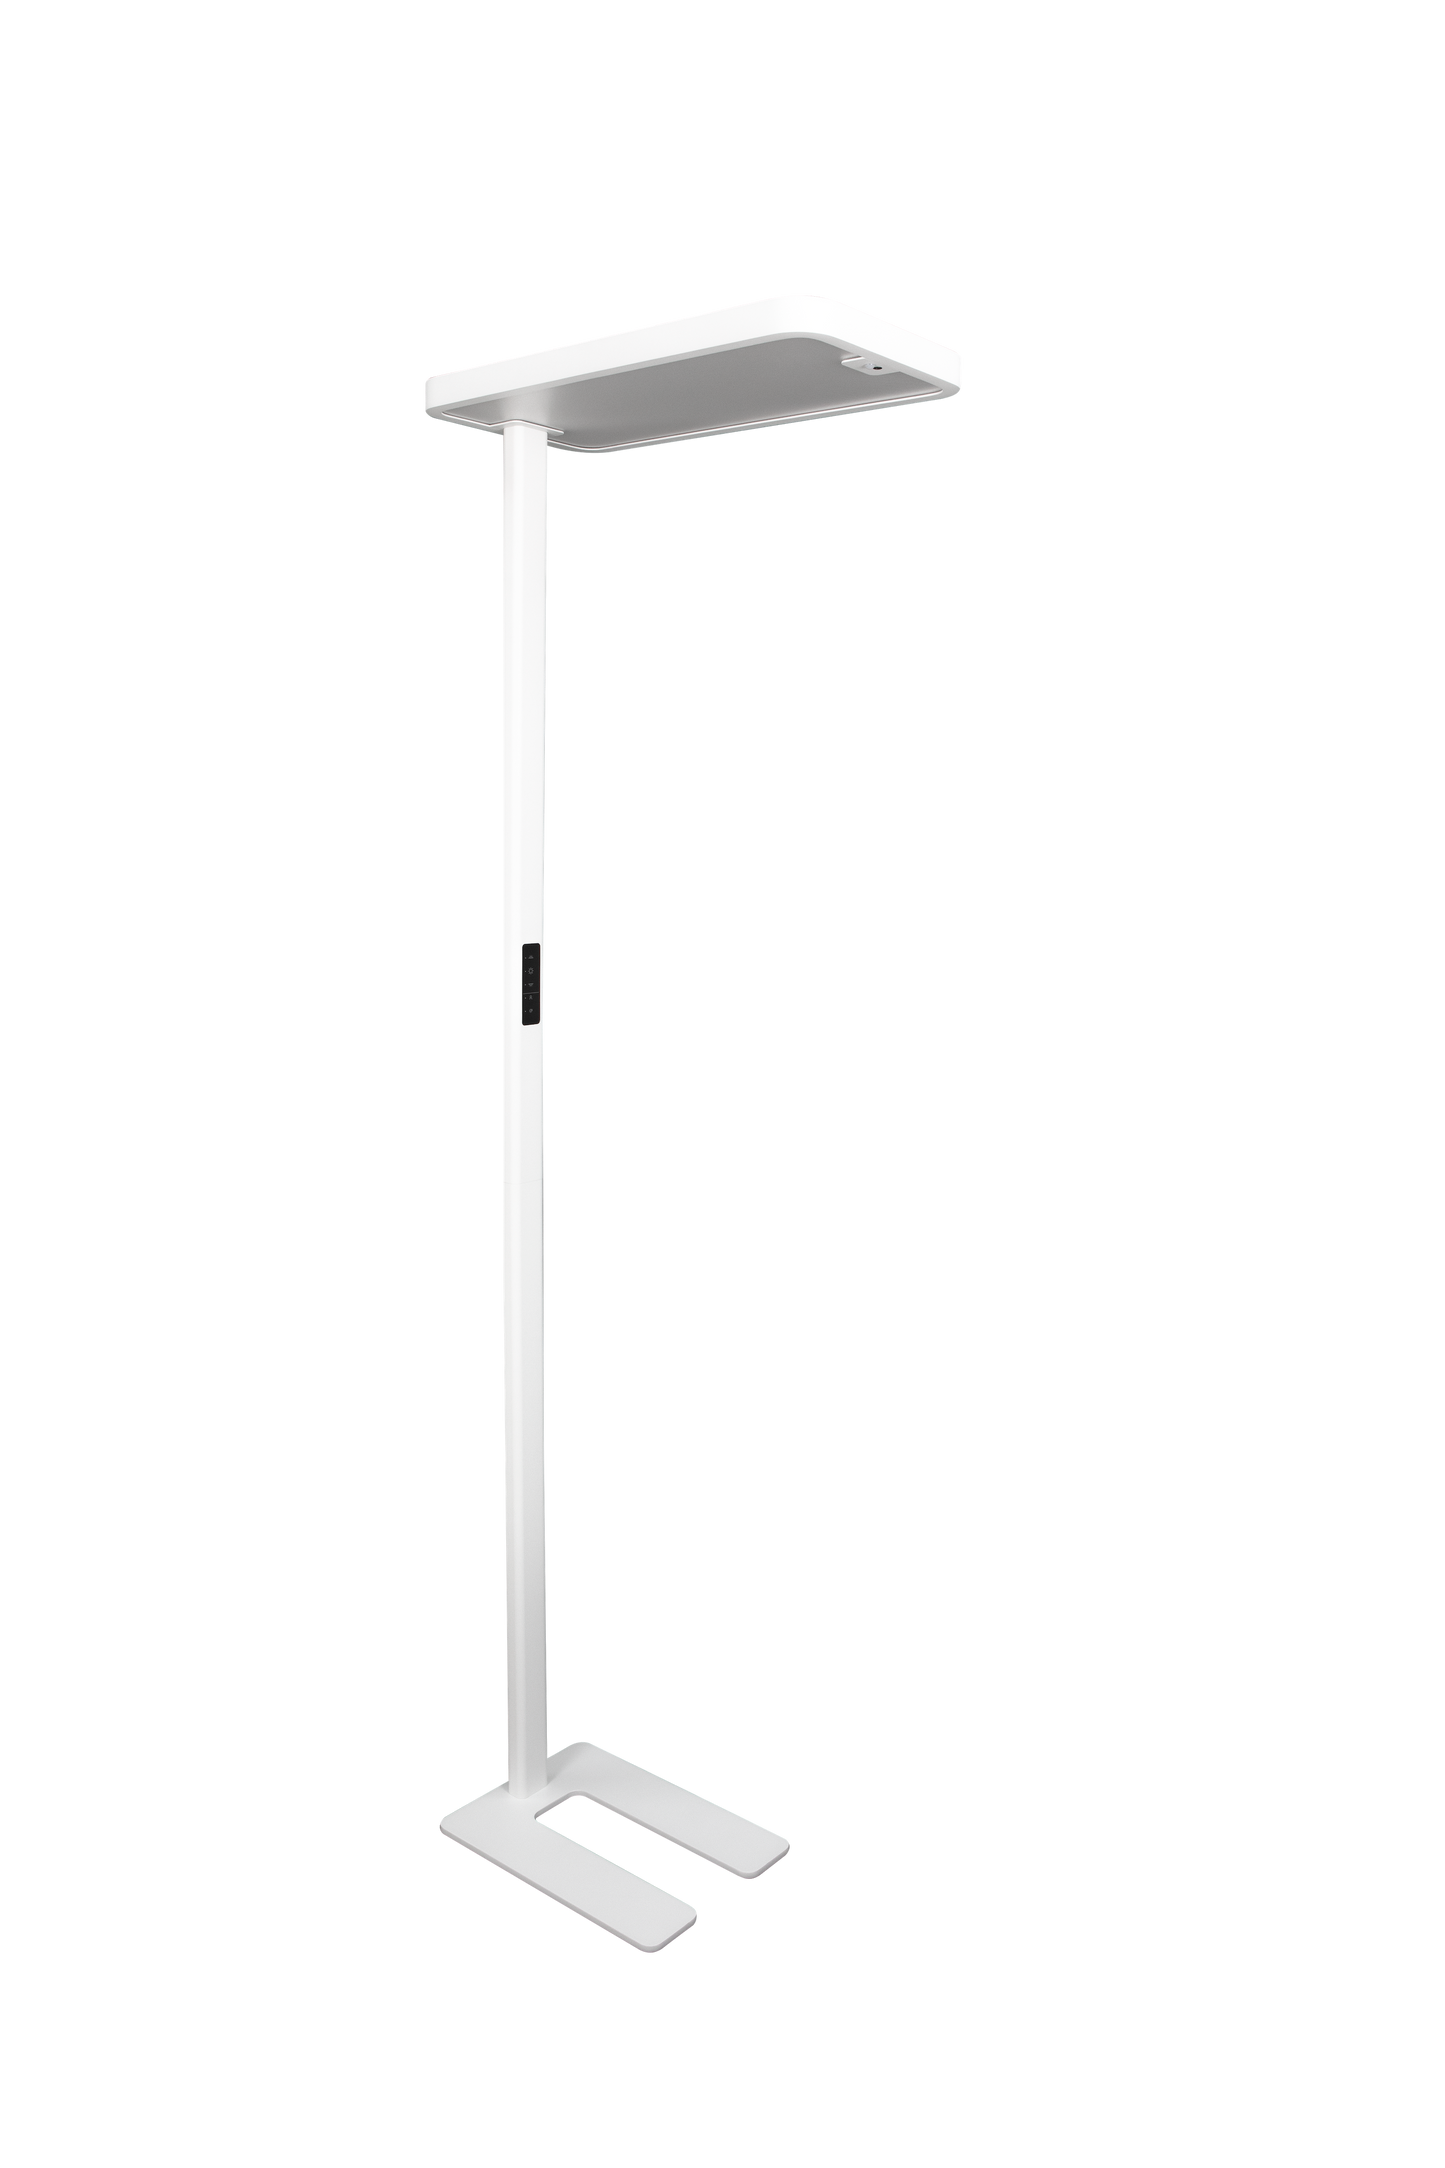 OVOSUN Pro - LED E-Reading Standing Lamp with Smart Controls